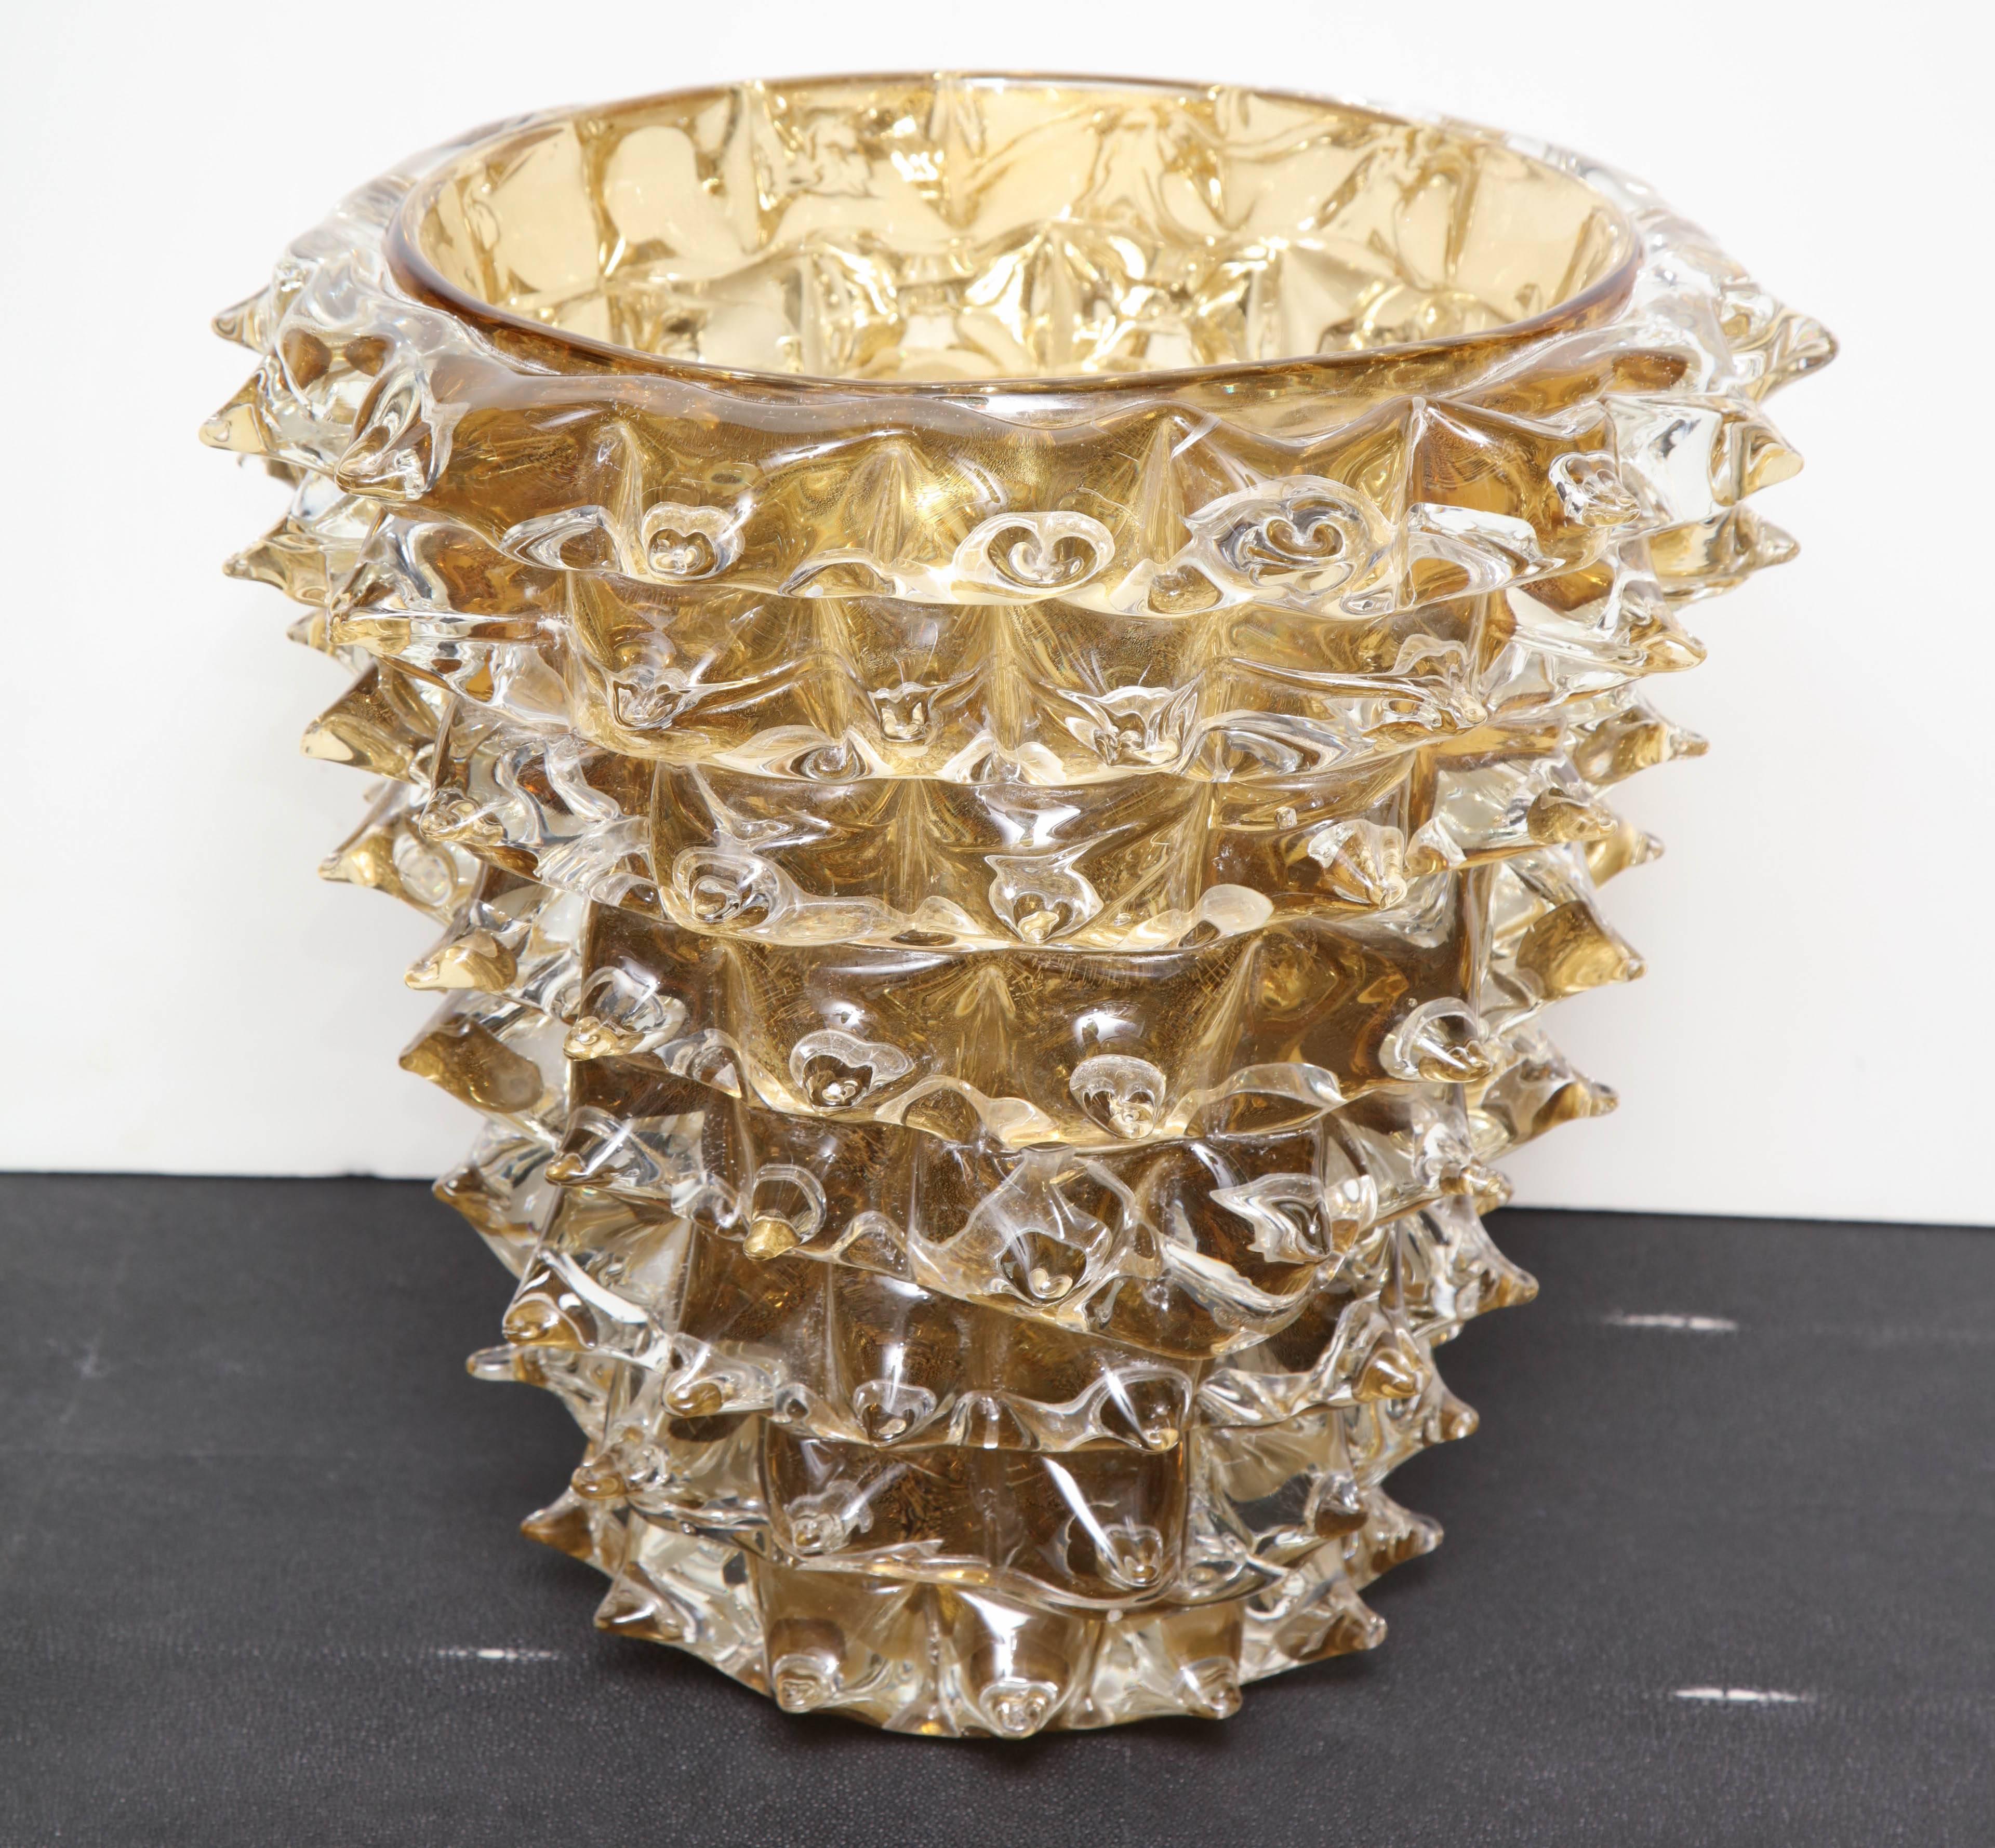 Signed constantini gold spiked Murano glass vase.